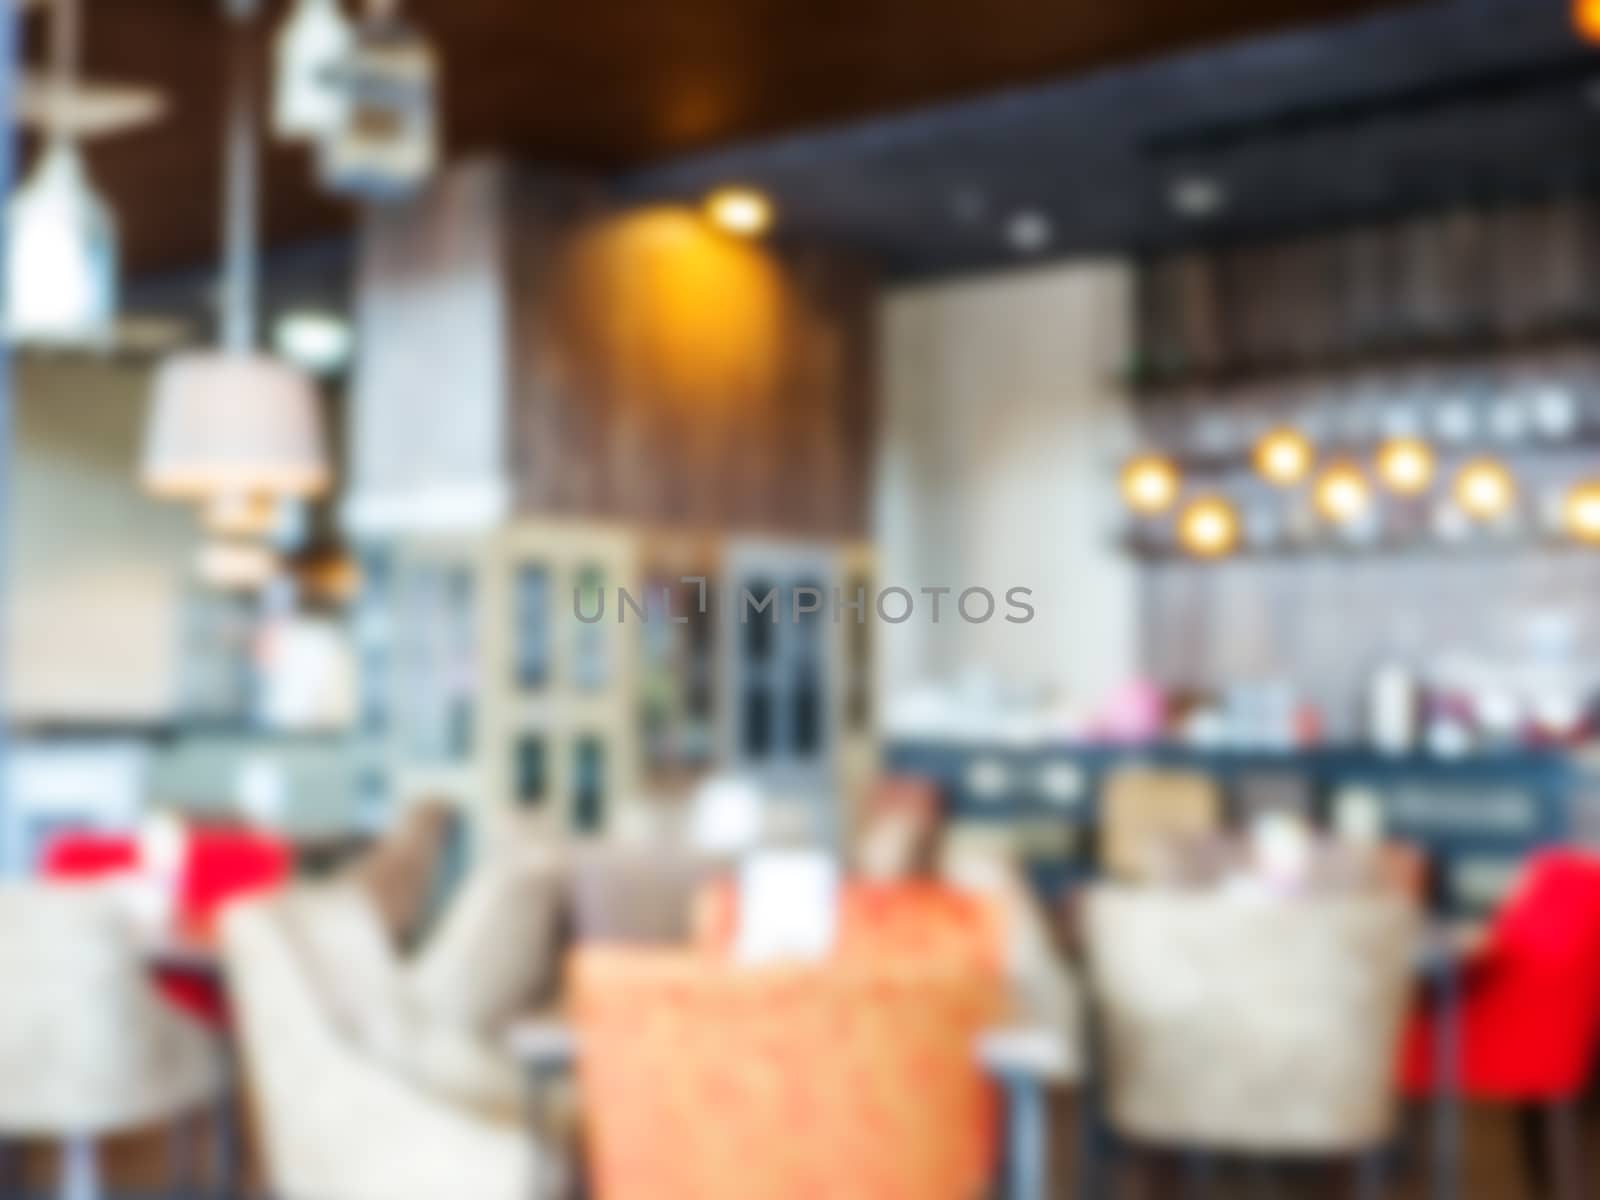 Blurred coffee shop or cafe as background by fascinadora